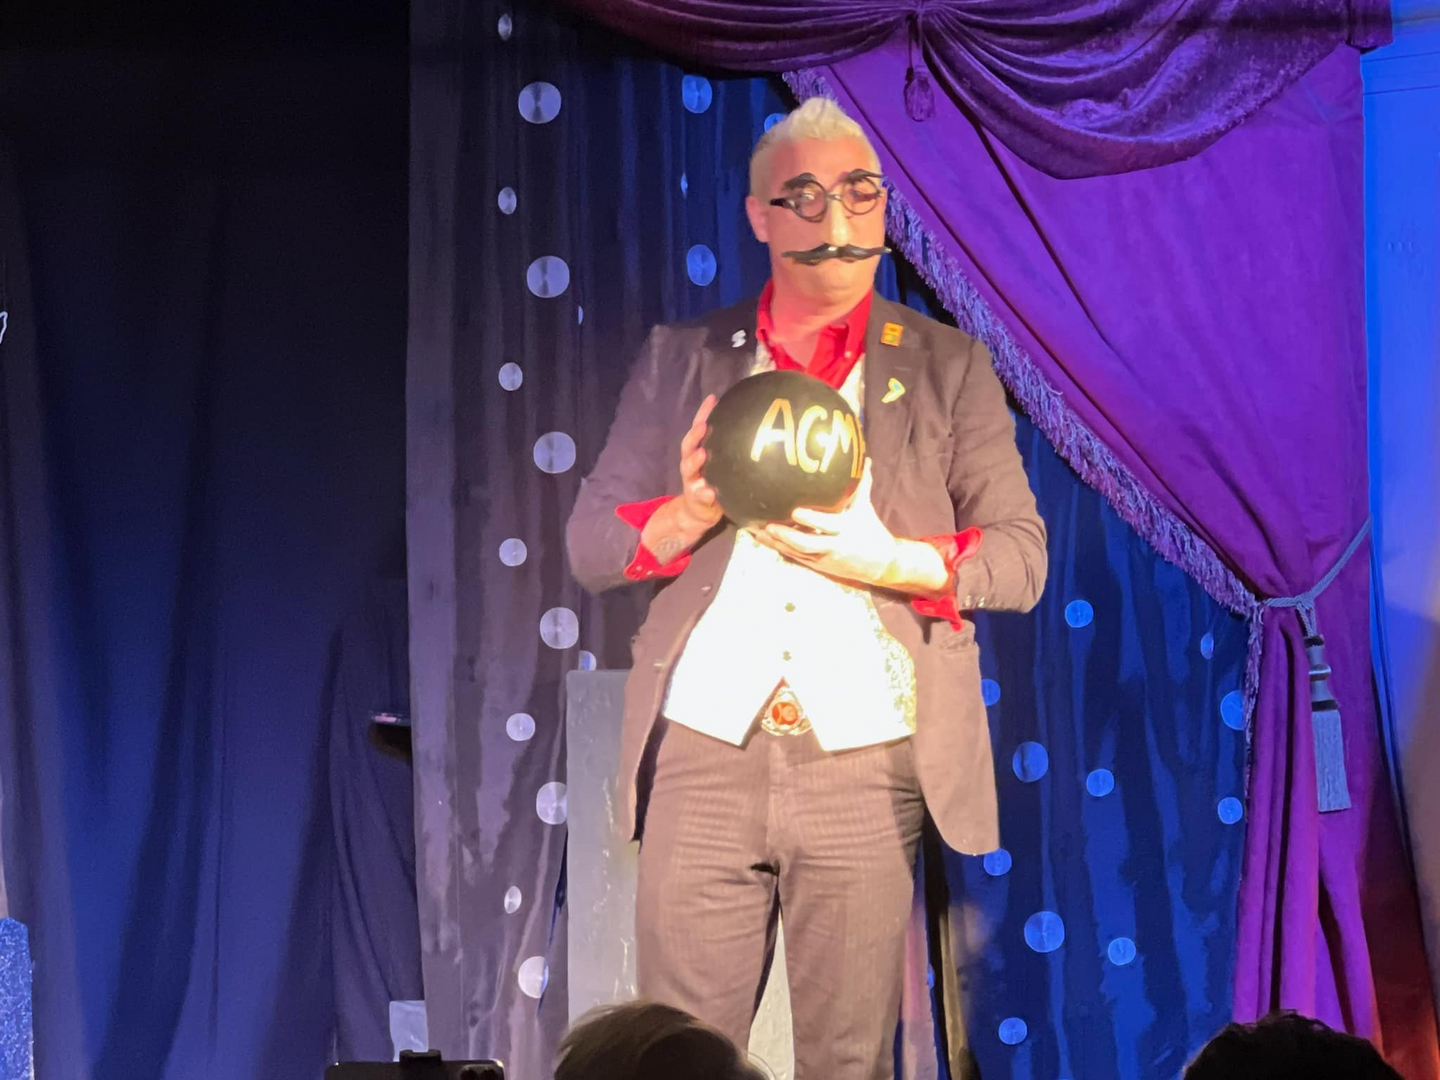 A man in a suit holding a ball on stage.